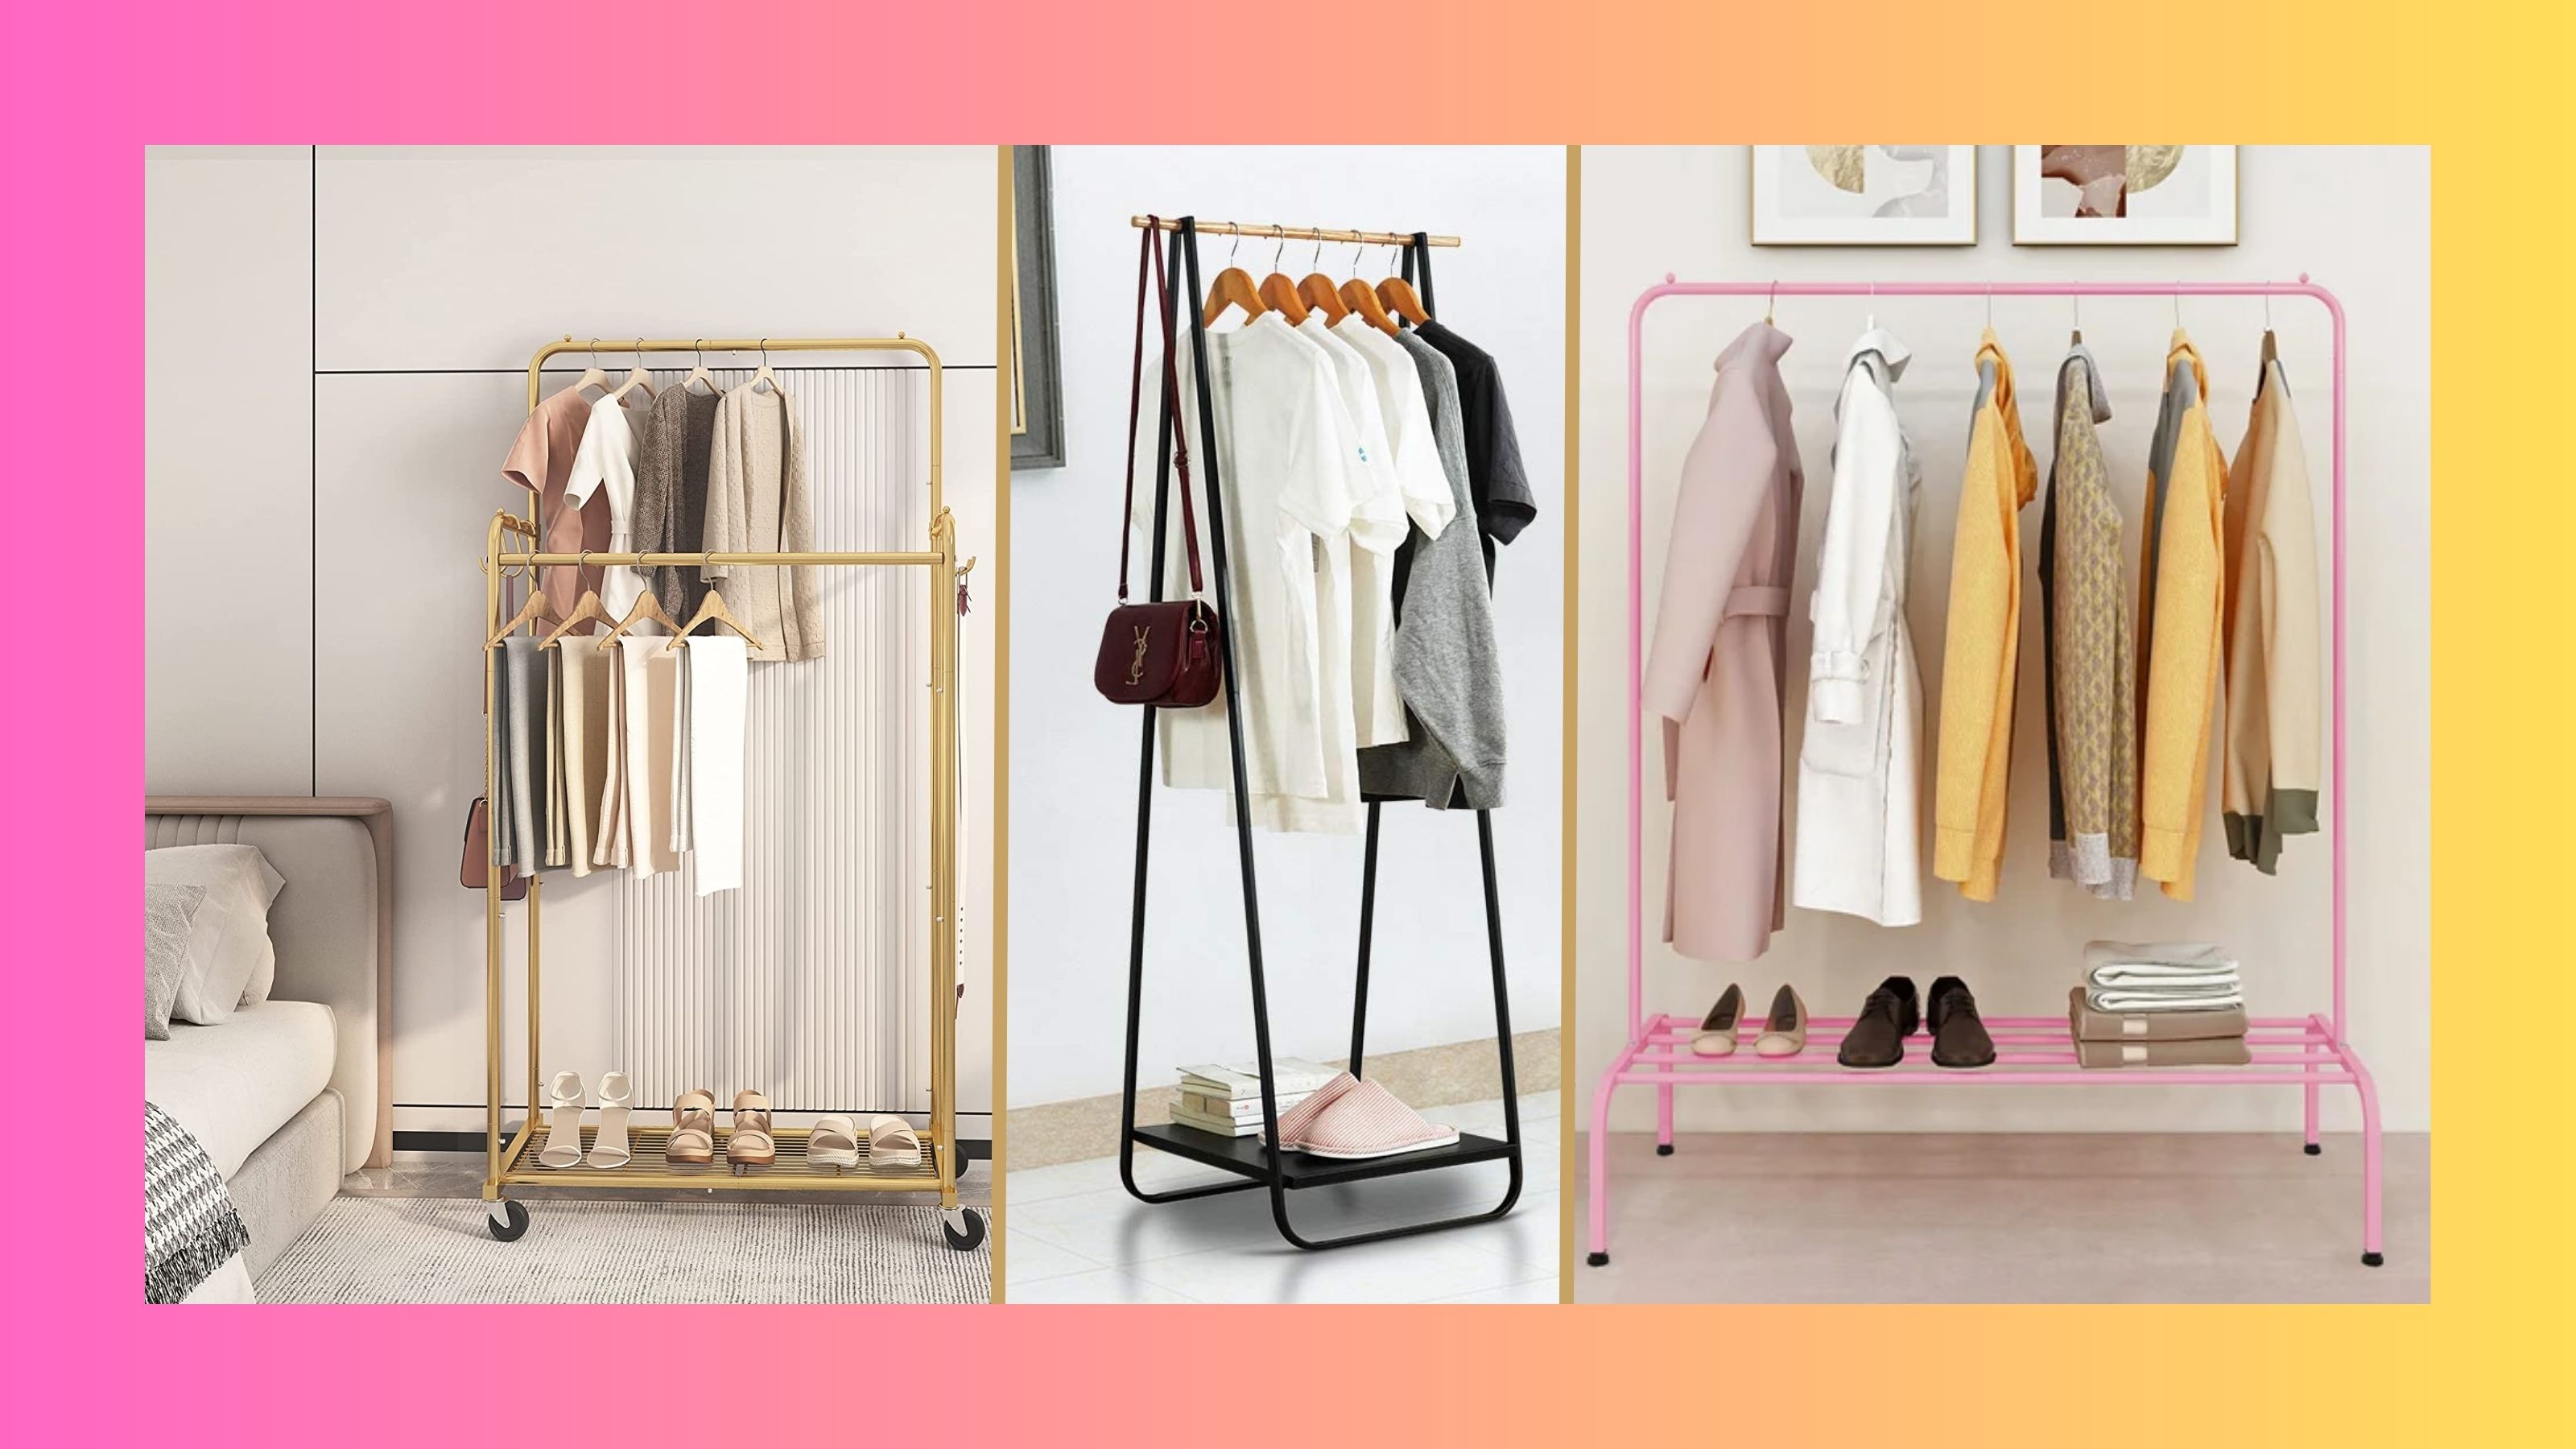 These Genius Hanger Add-Ons Save Space for Under $1 Apiece at